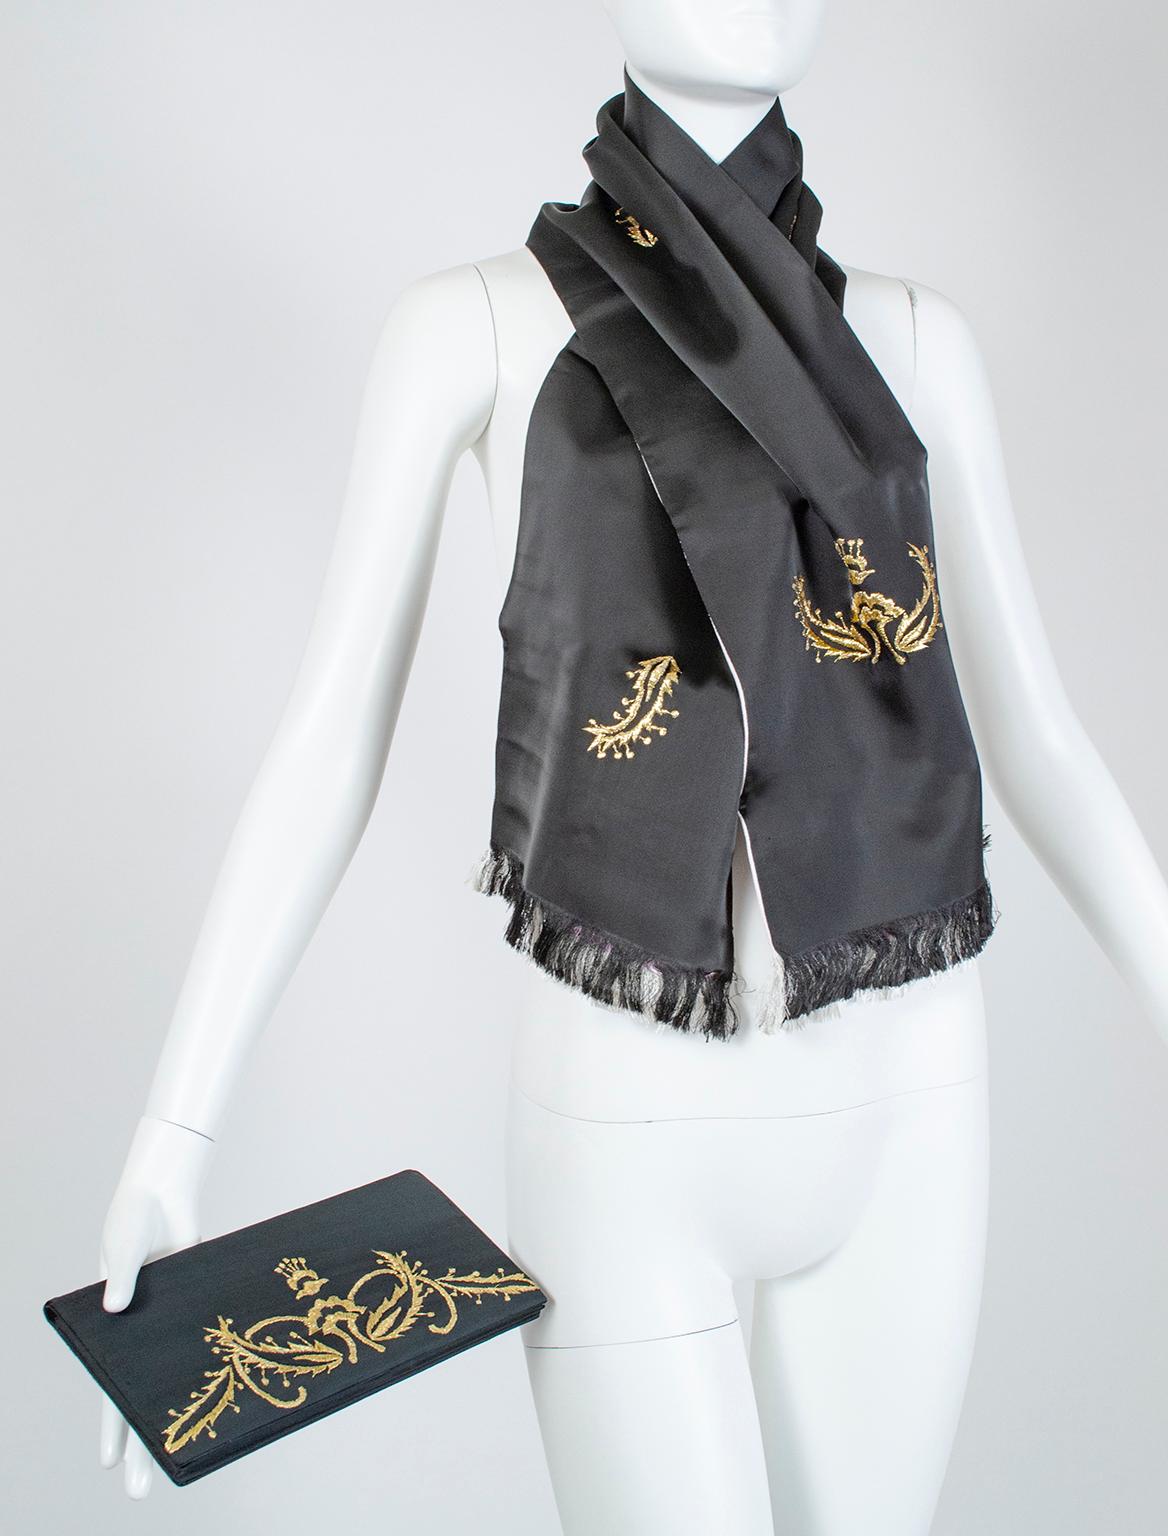 When no self-respecting woman left the house with mismatched accessories comes this matching scarf and evening clutch set, which would look devastating with our gold lamé and black satin stilettos sold under separate listing. Just the thing to make